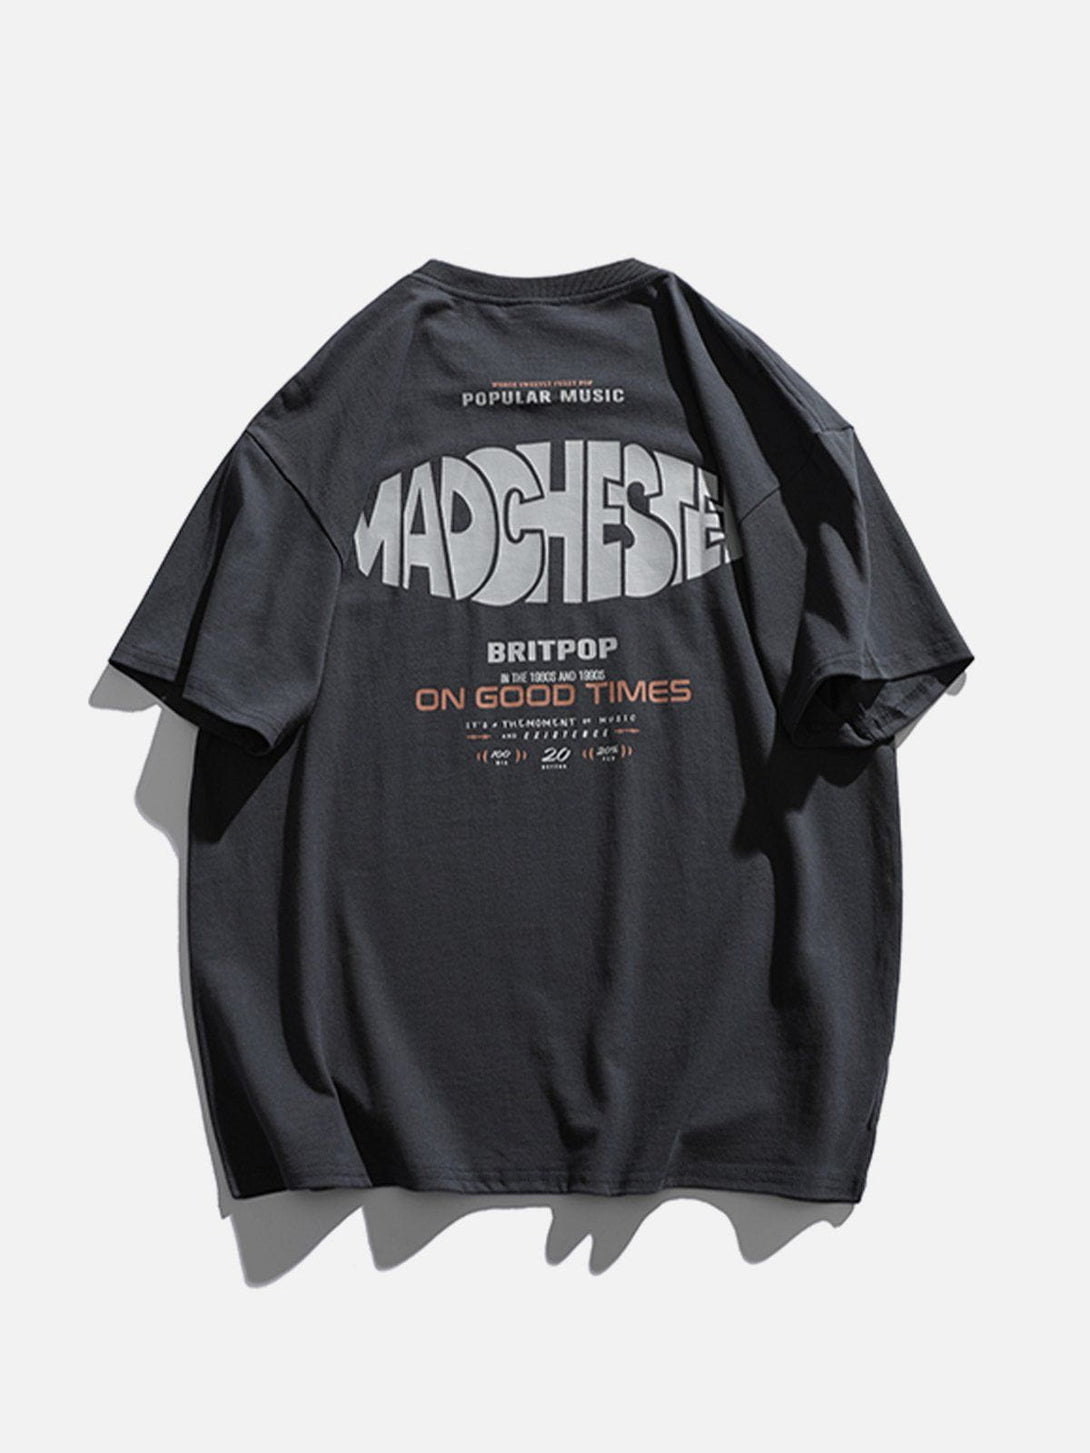 Majesda® - Back Deformed Letter Graphic Tee- Outfit Ideas - Streetwear Fashion - majesda.com